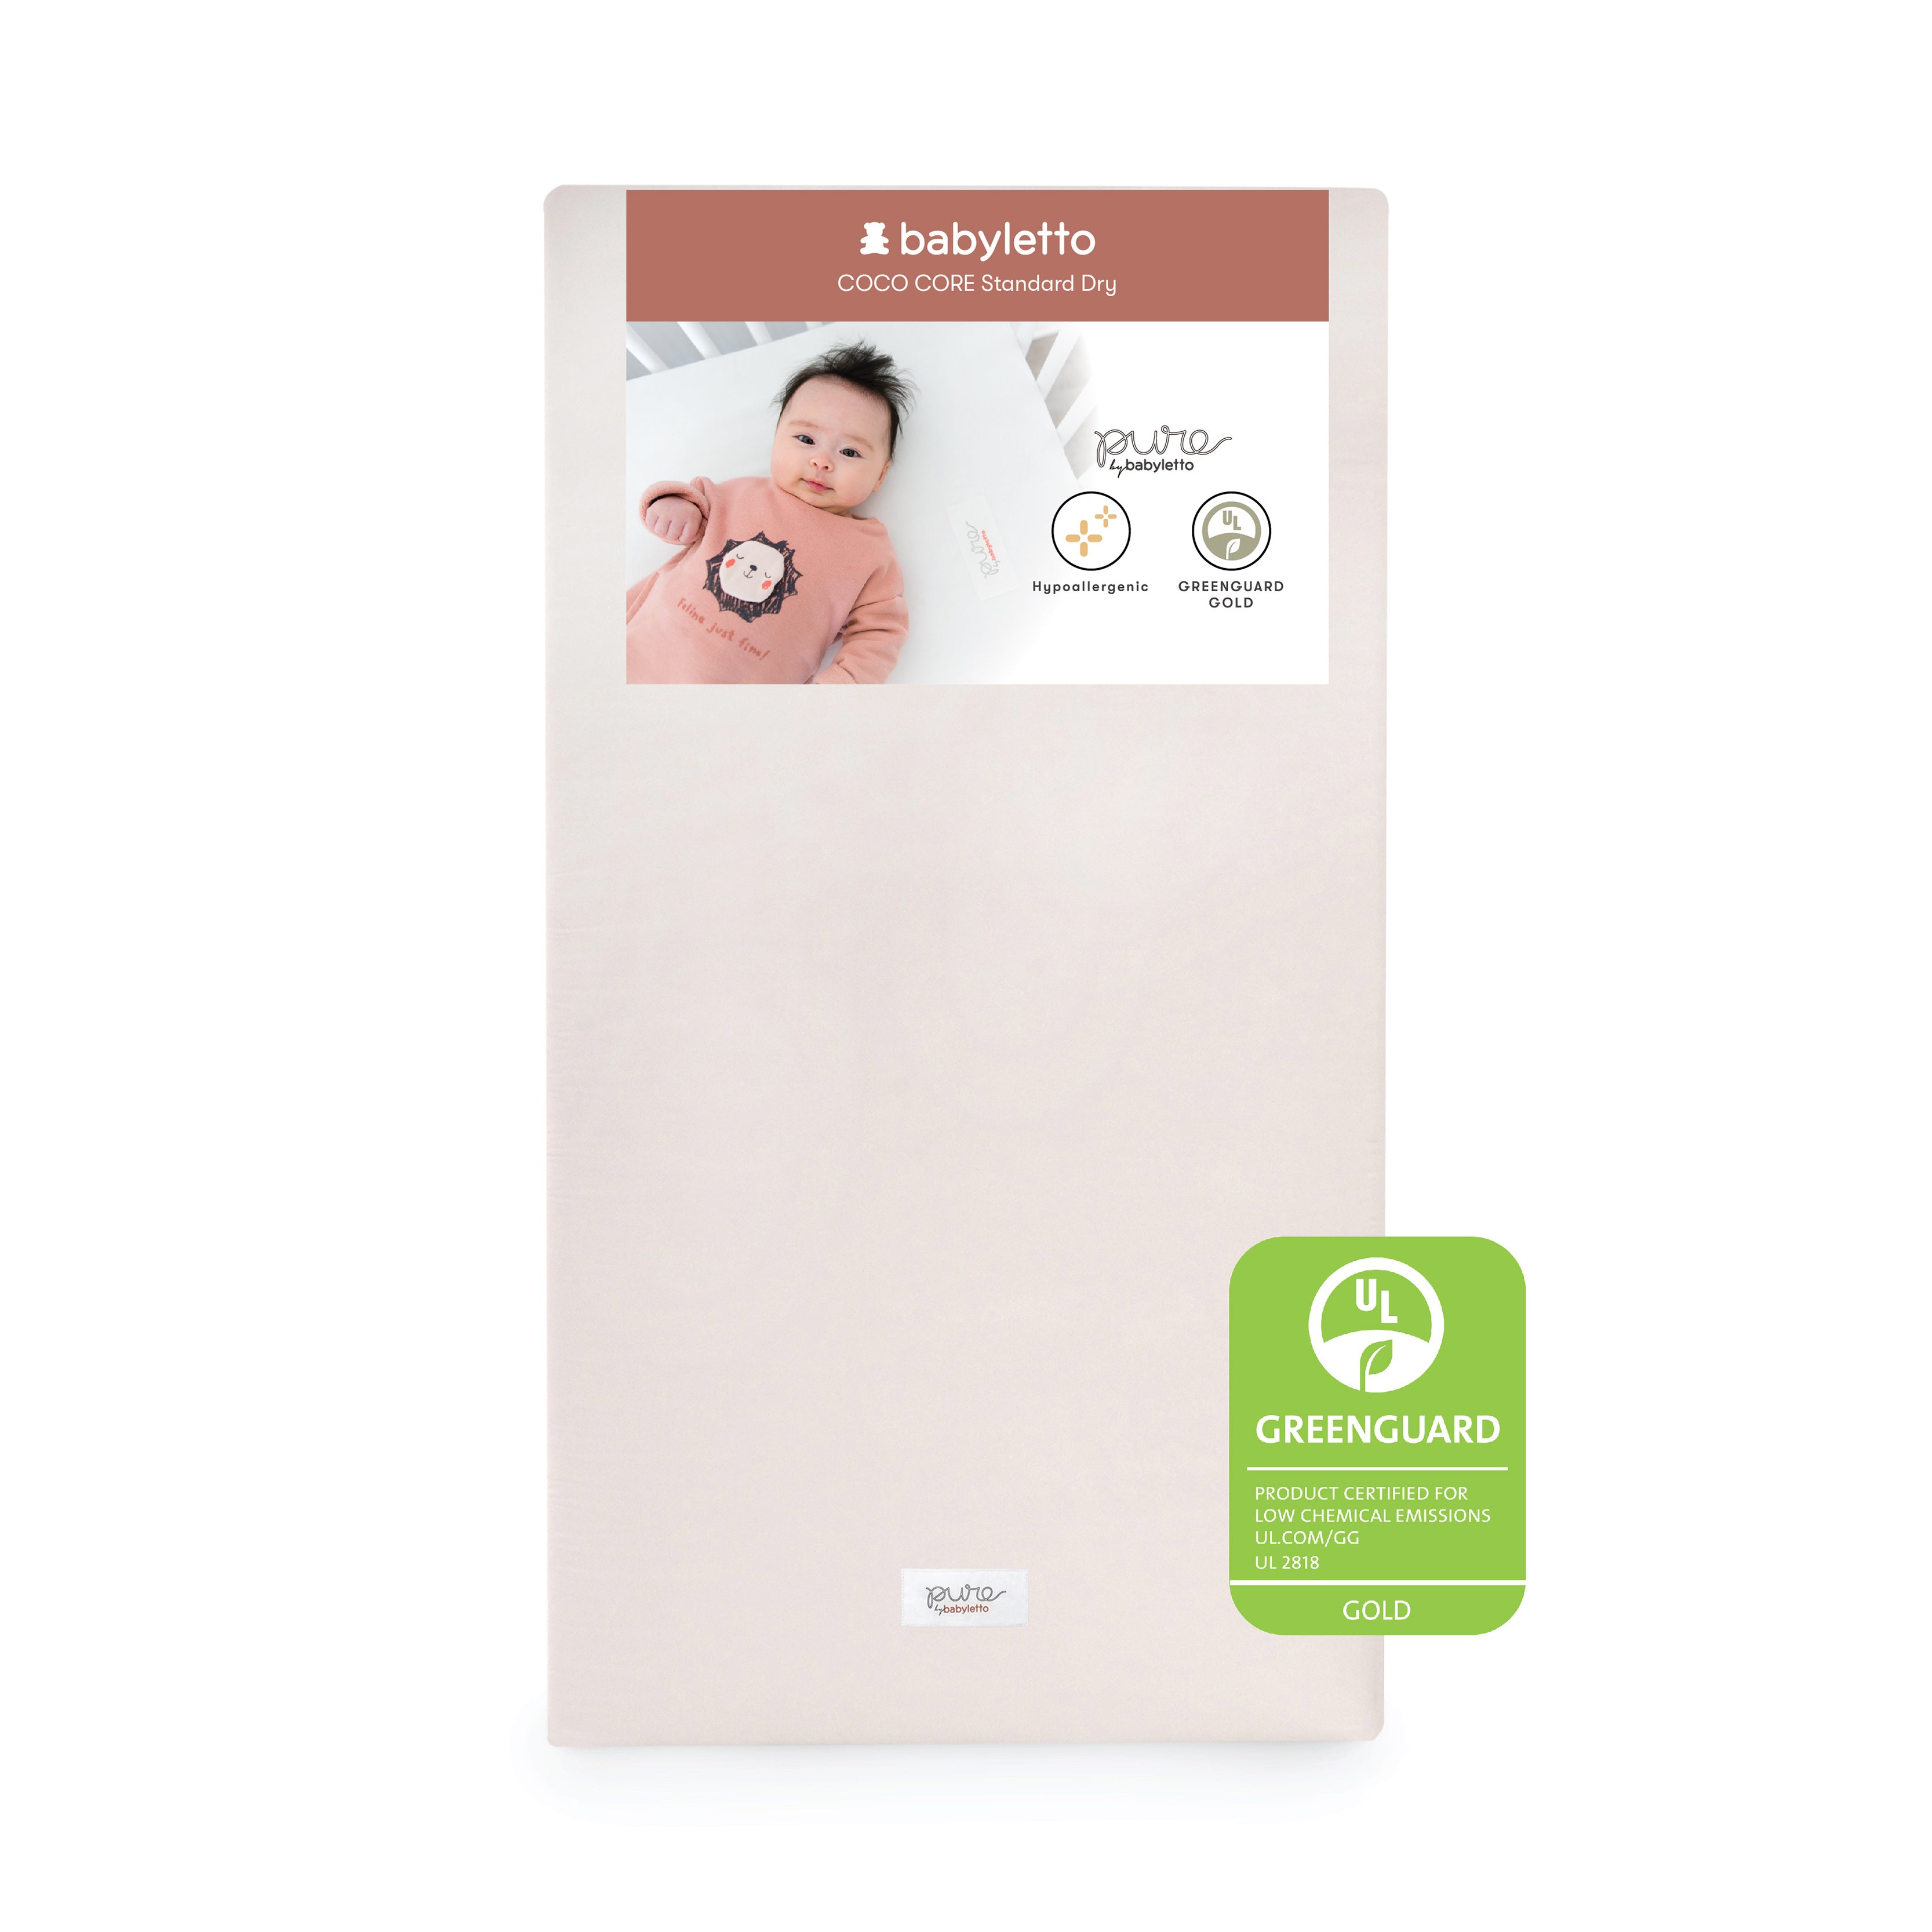 Babyletto Coco Core Crib Mattress | Dry Waterproof Cover | Naturally Firm